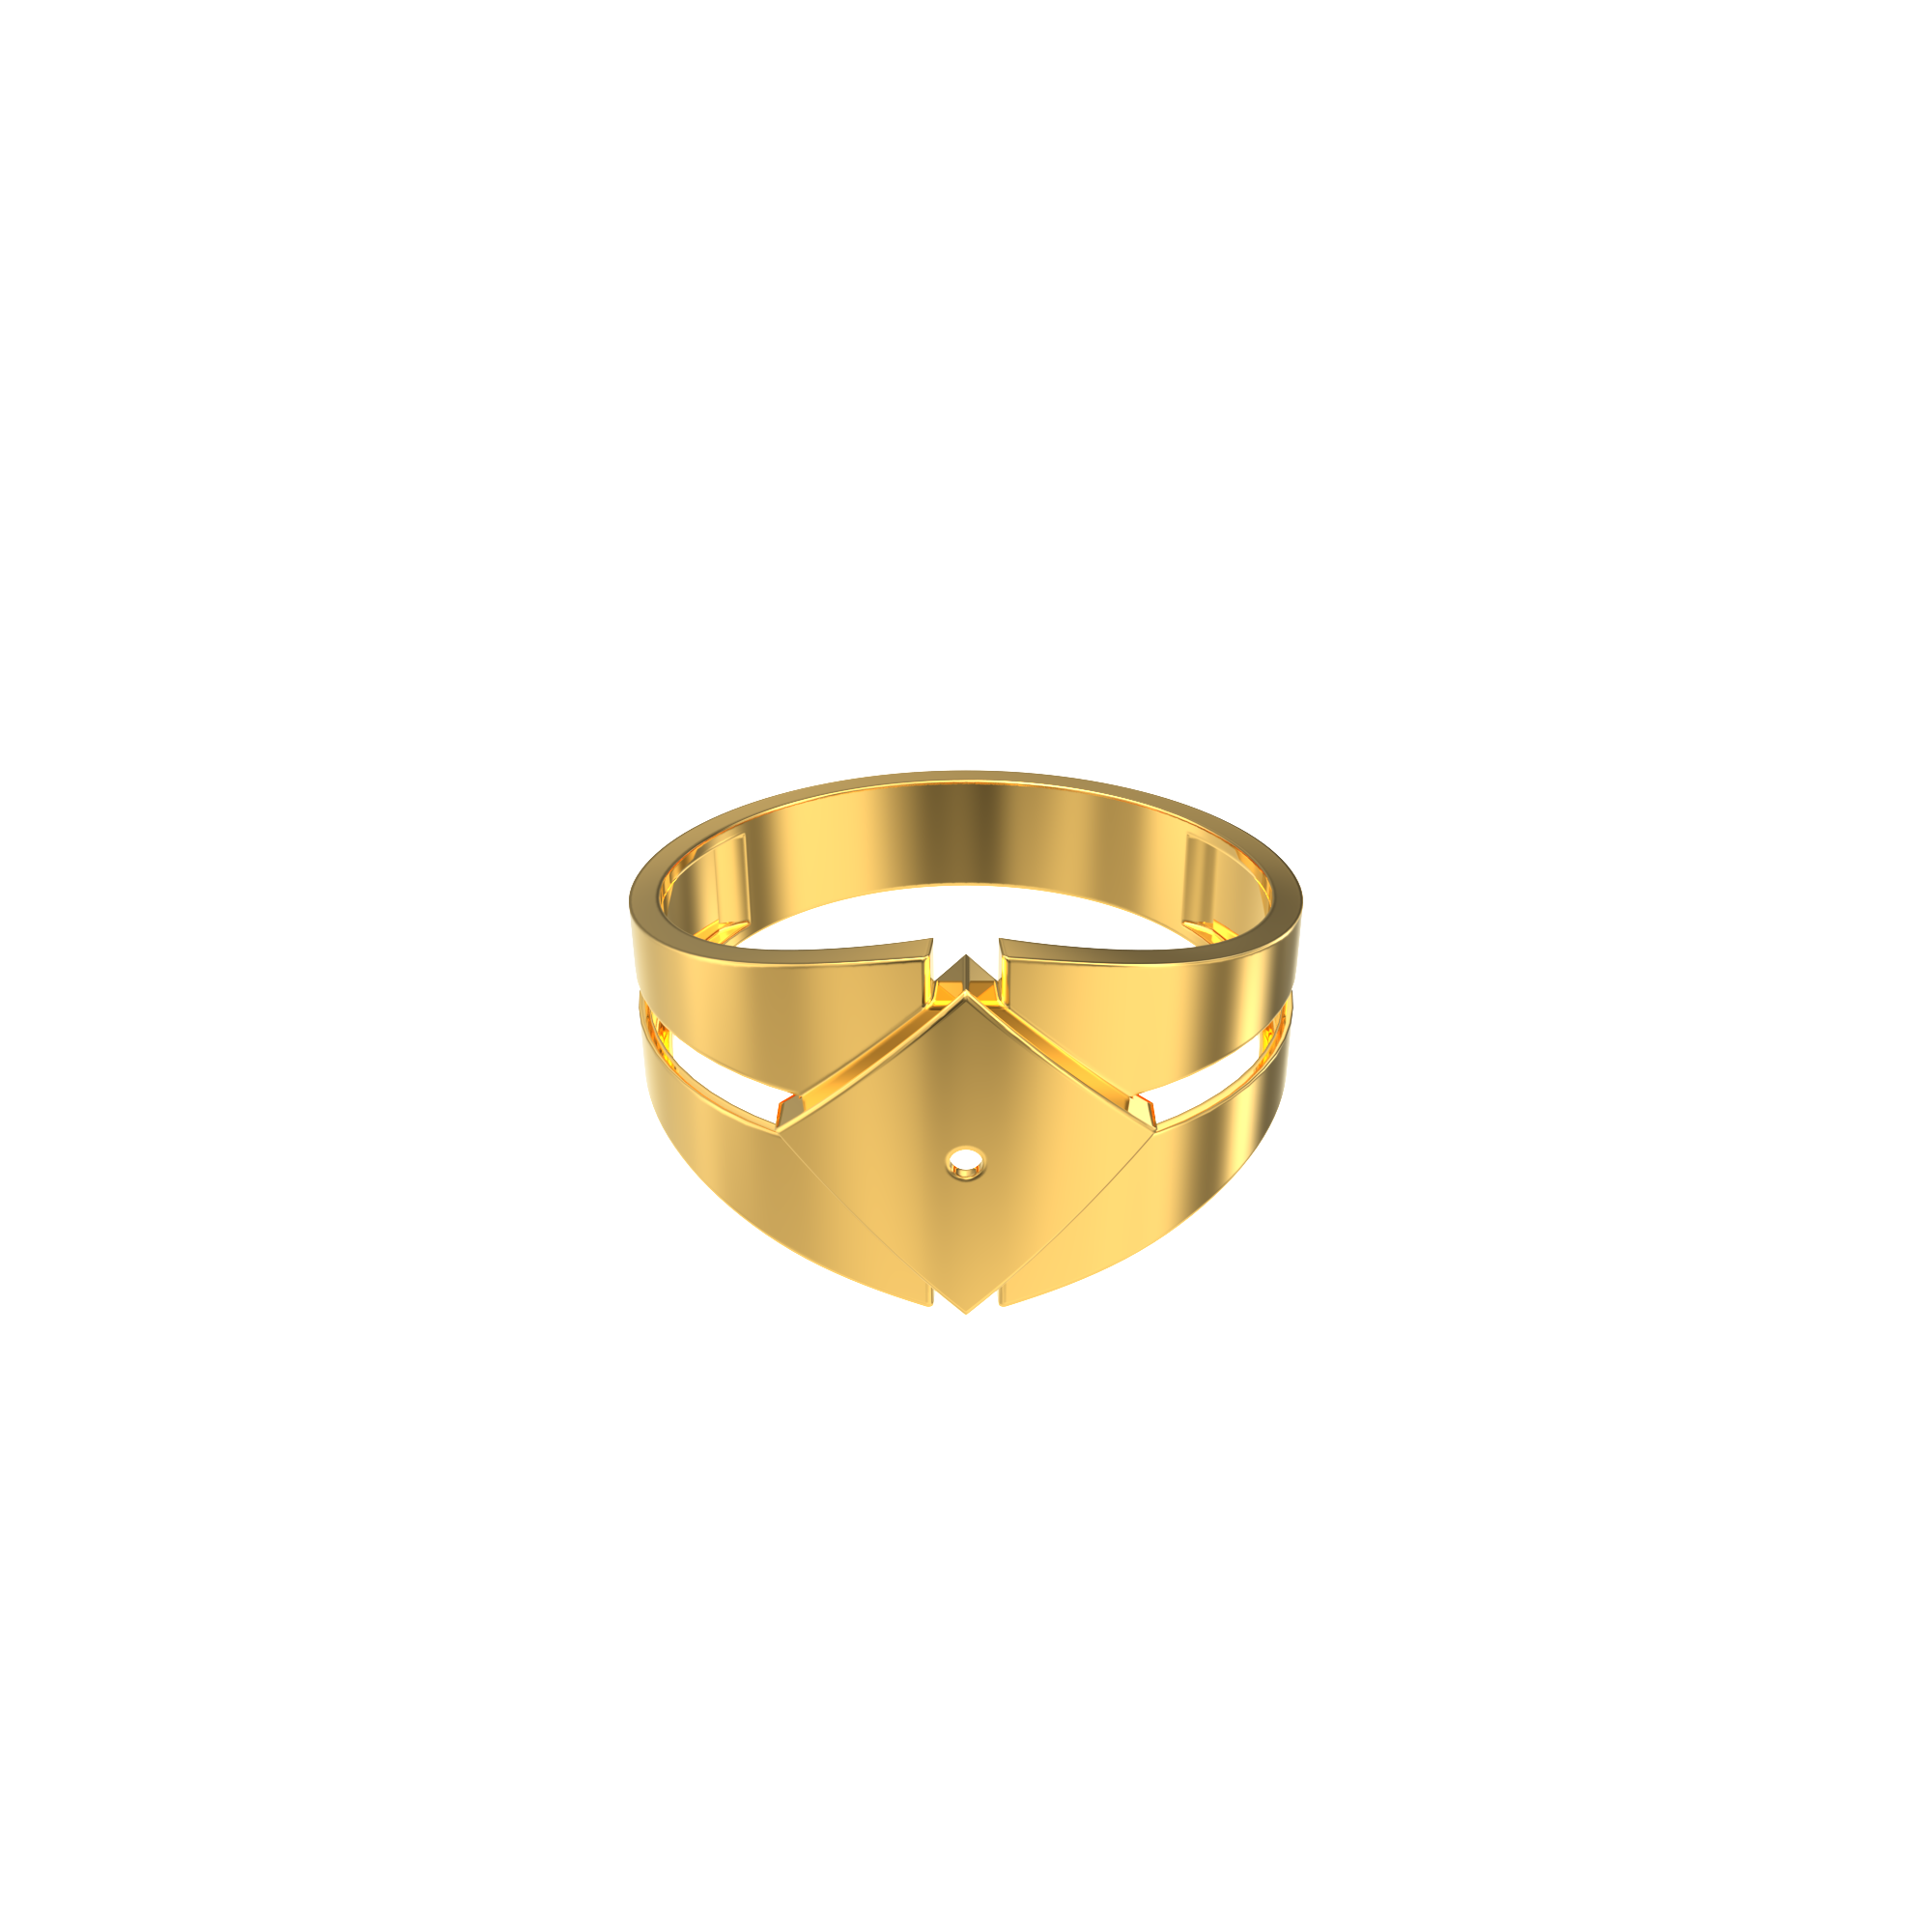 Male-Gold-Ring-Manufacturers-in-Chennai